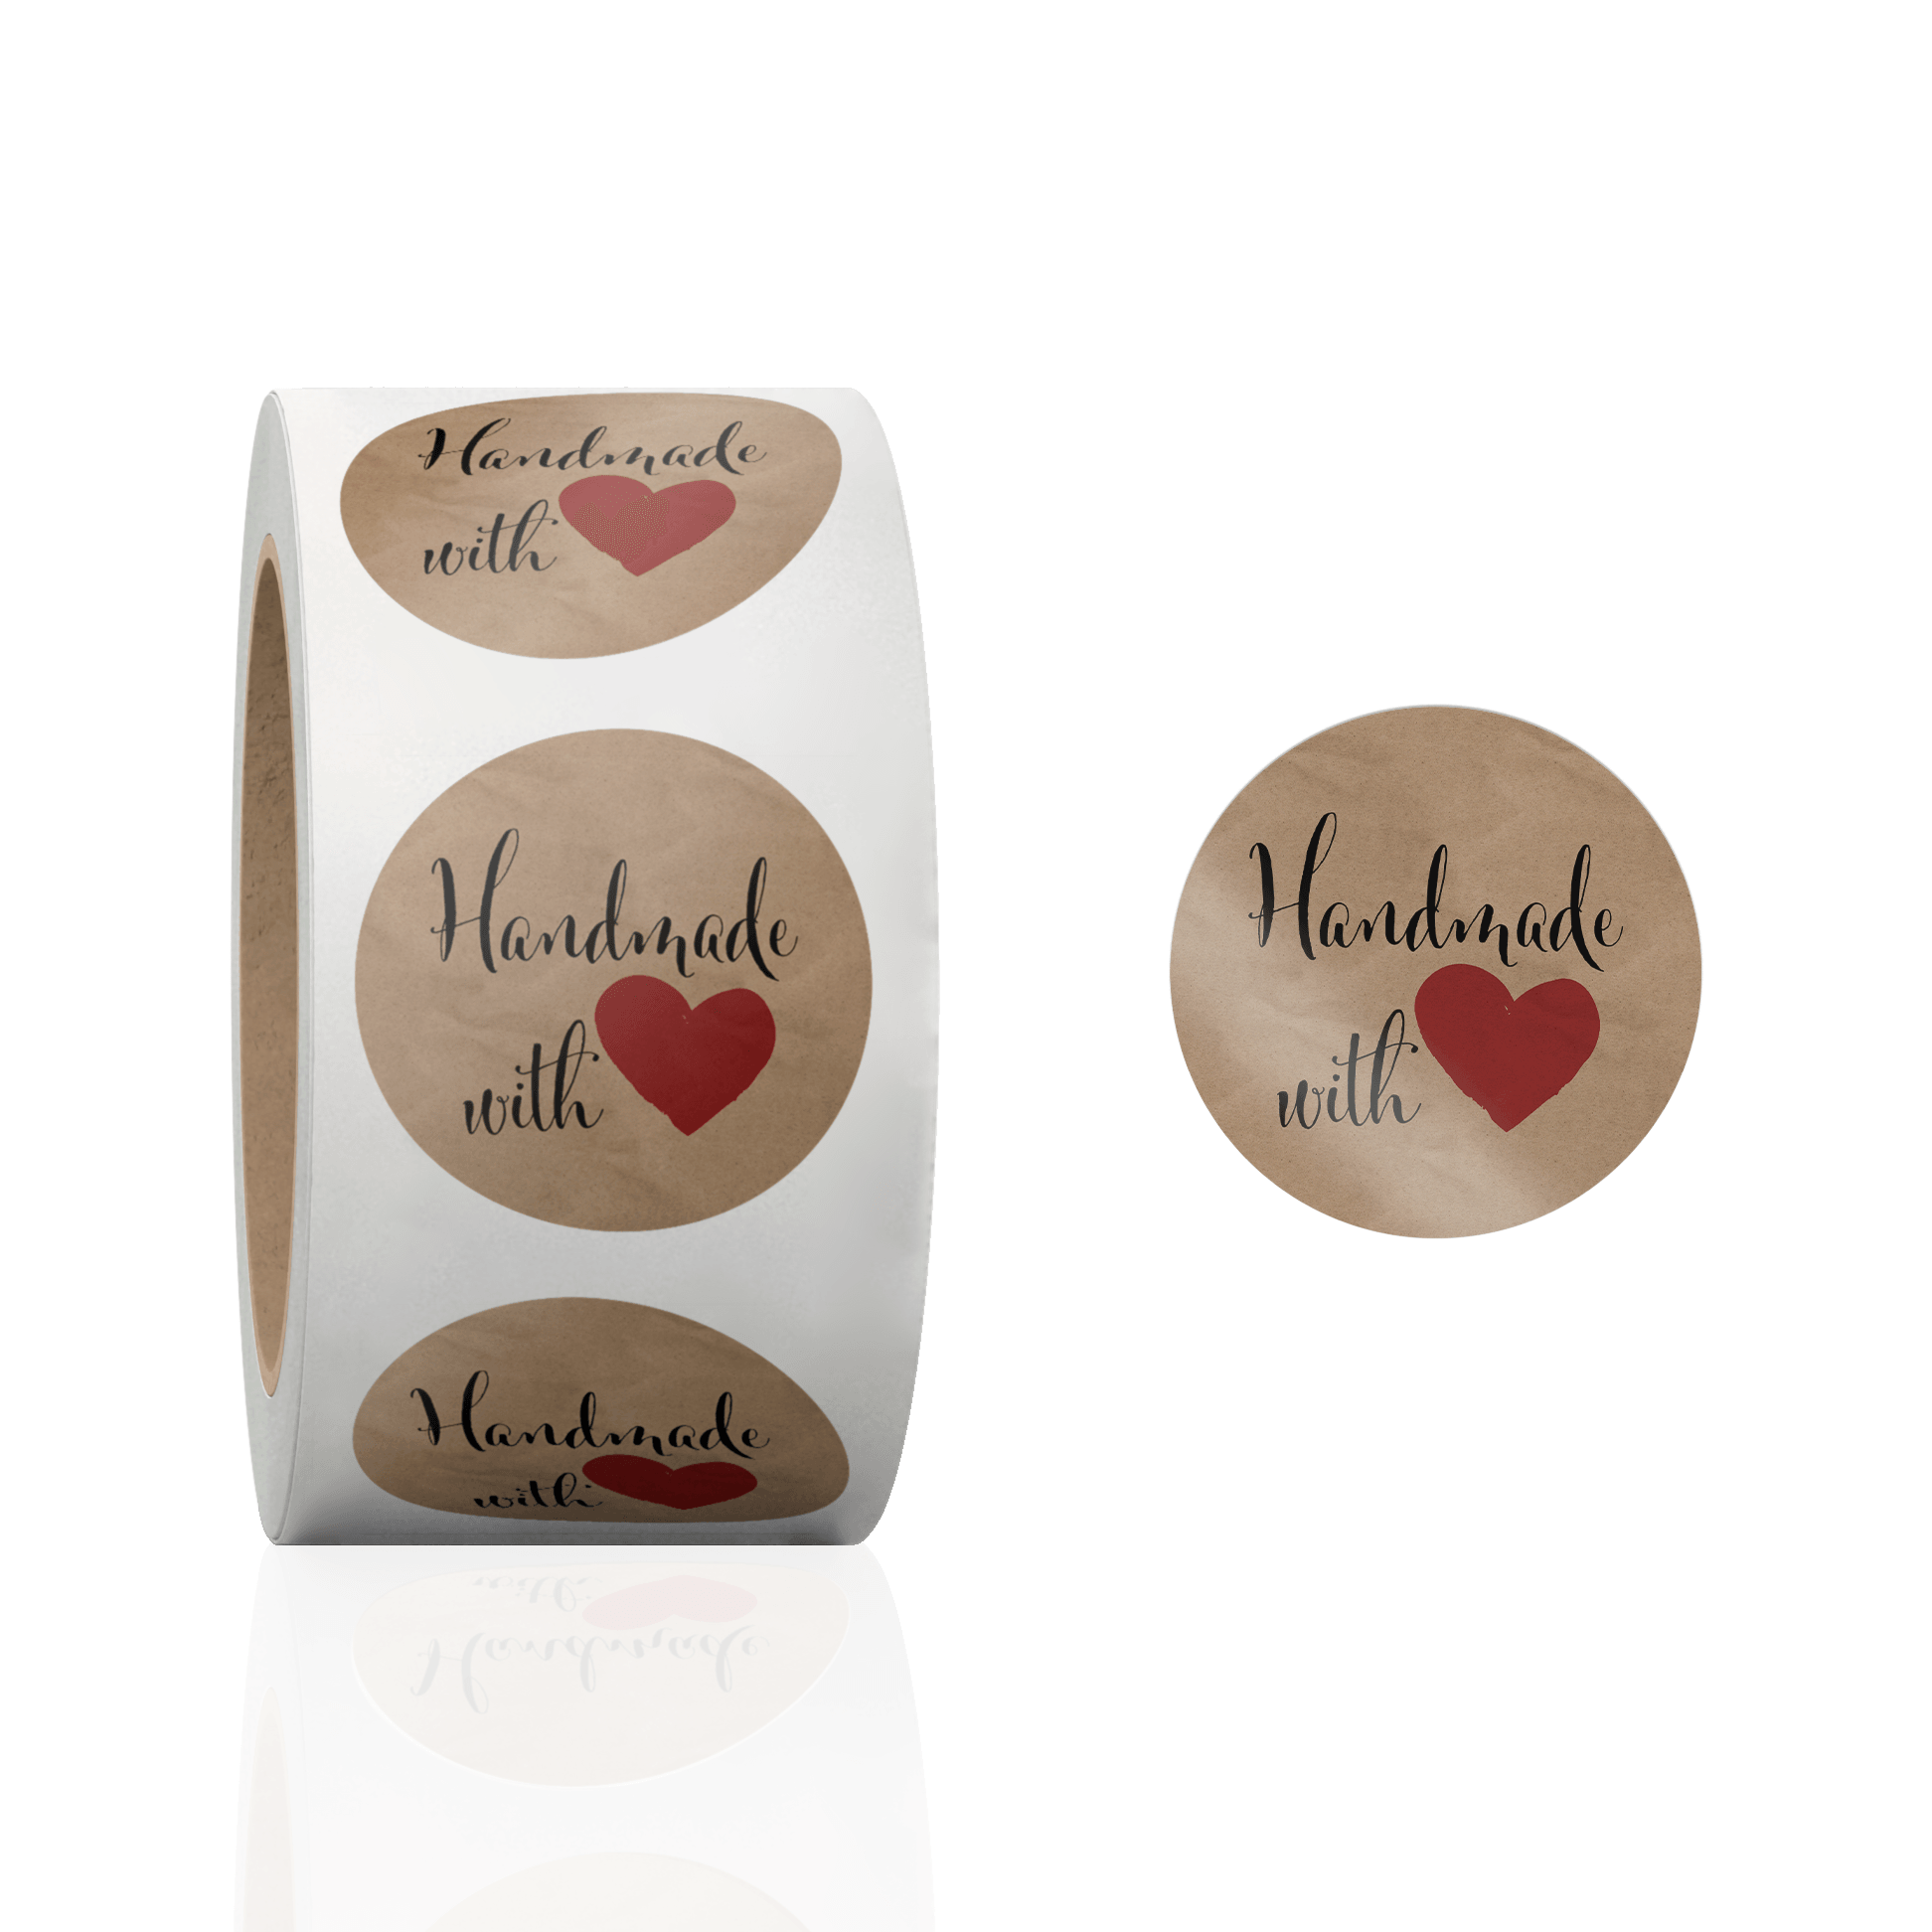 1.5 Handmade with Love Stickers Roll - Packing Stickers - Thank You Labels for Favors - Small Business Thank You Stickers | 500 Pcs